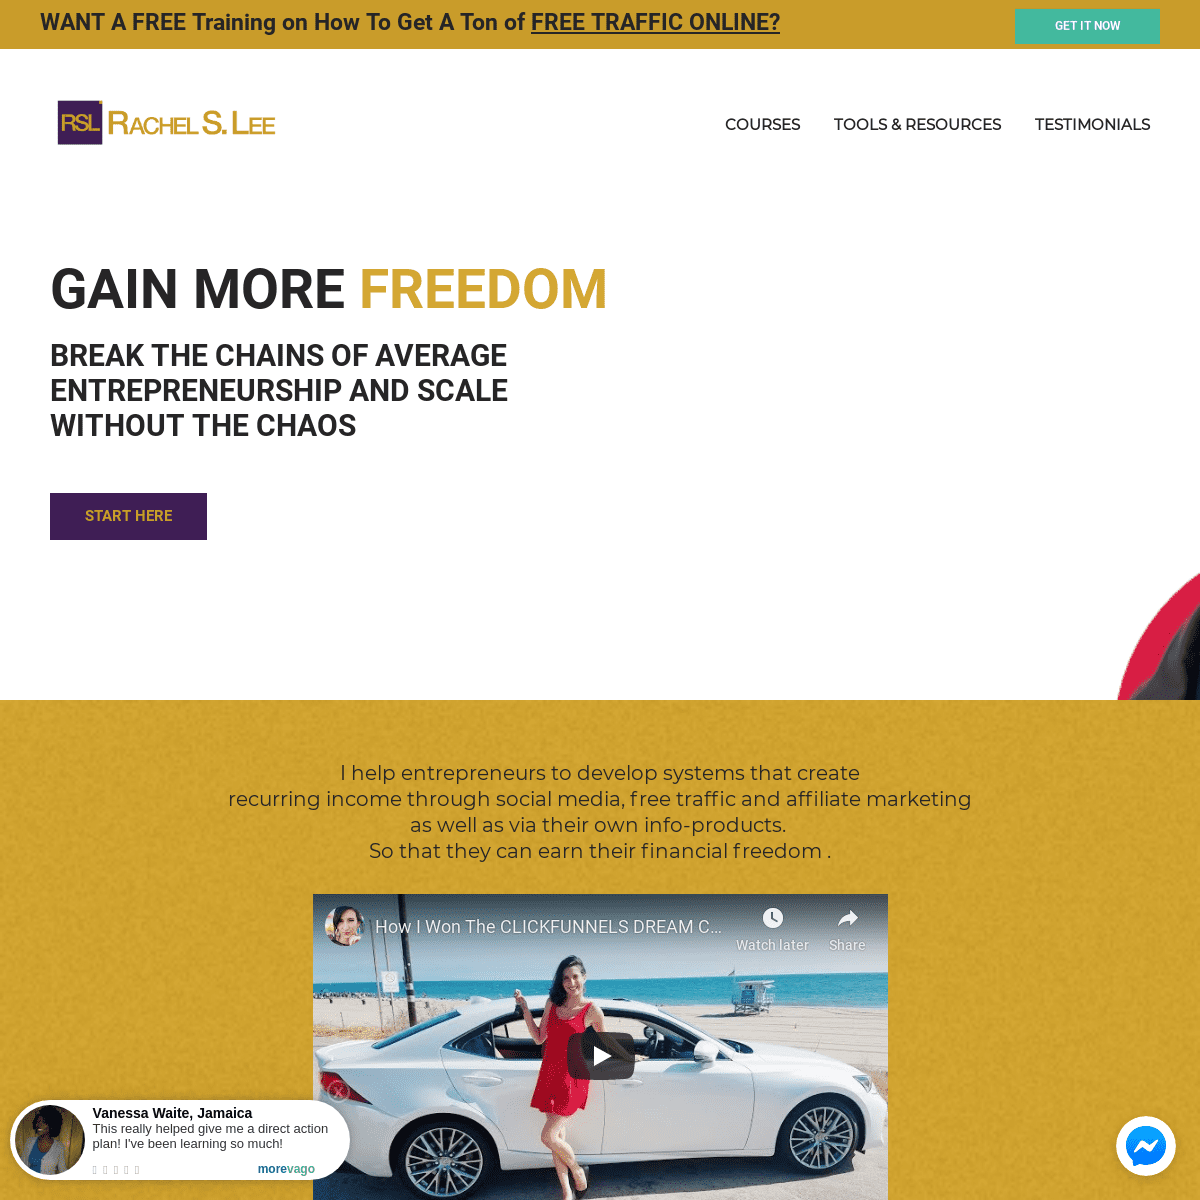 Rachel S. Lee - Affiliate Marketing for a Freedom Based Lifestyle